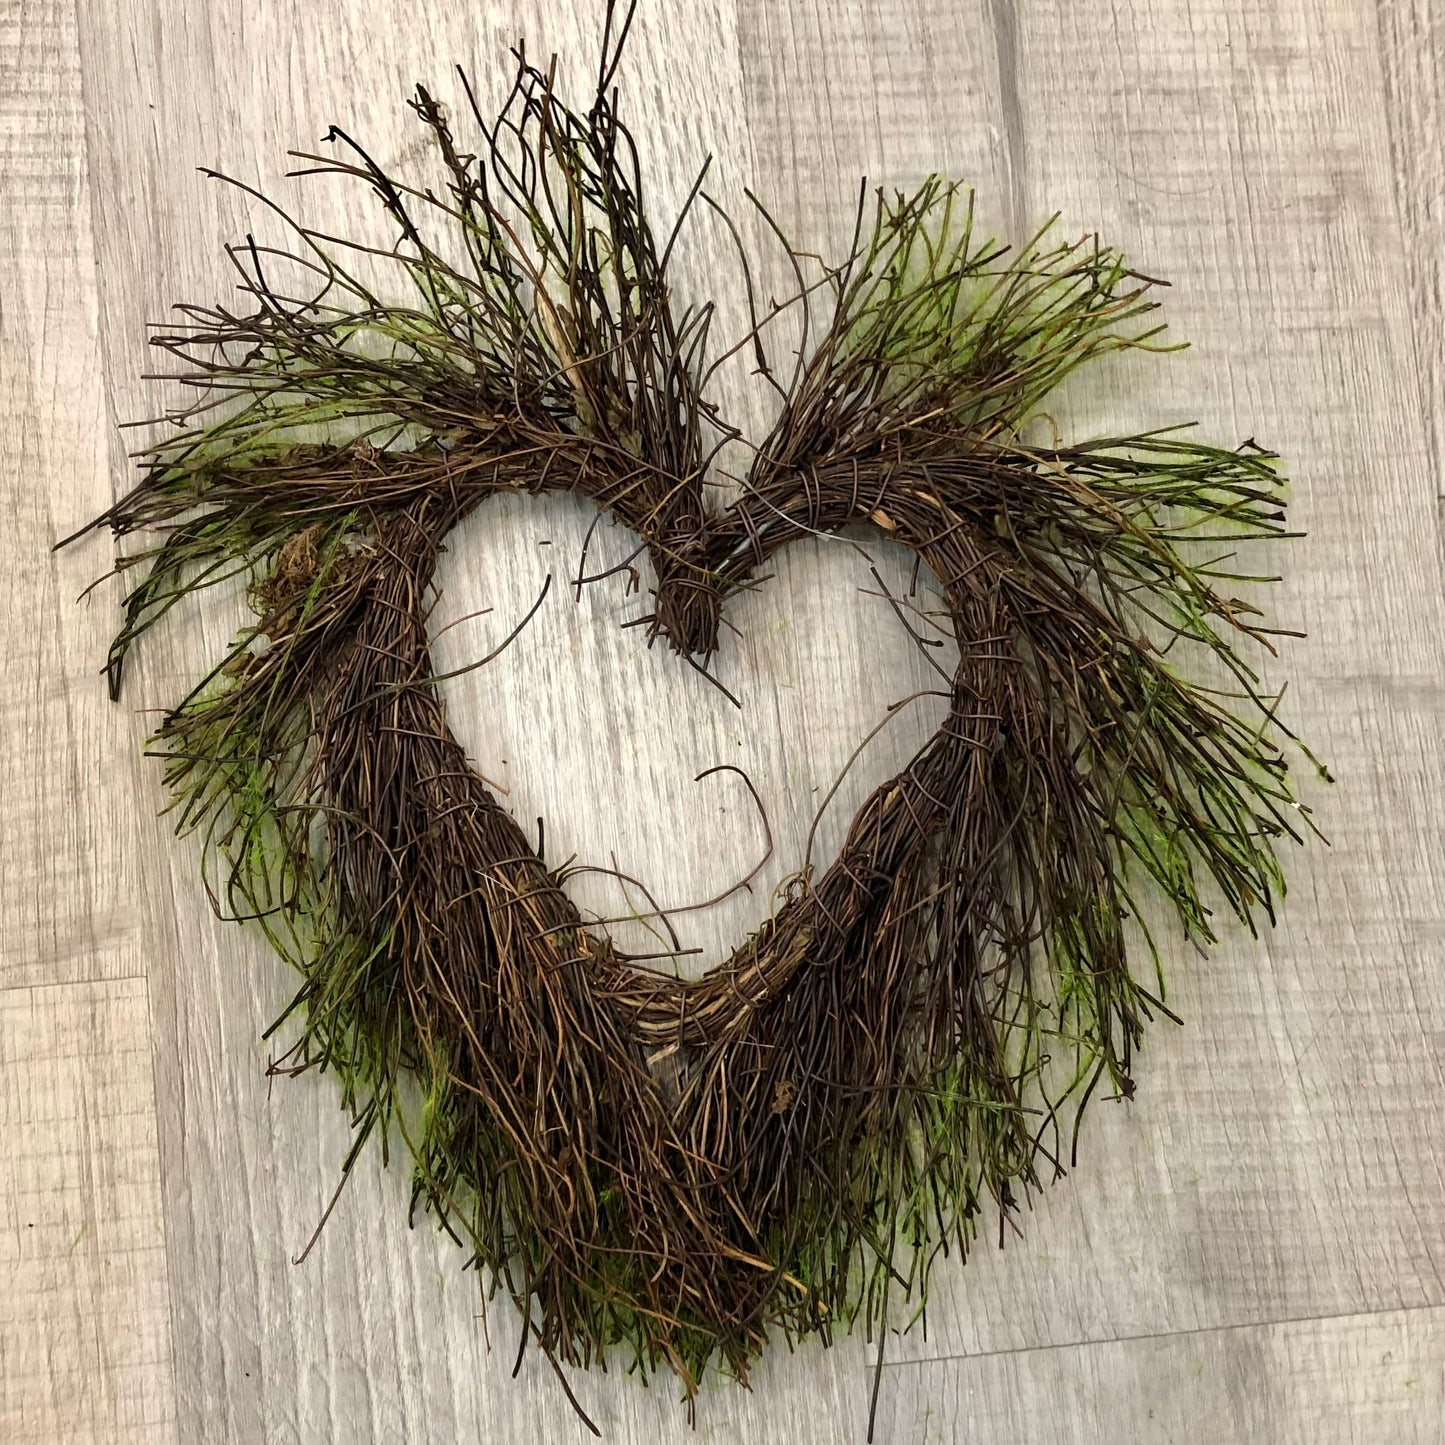 Mossy Twig Heart in Cello